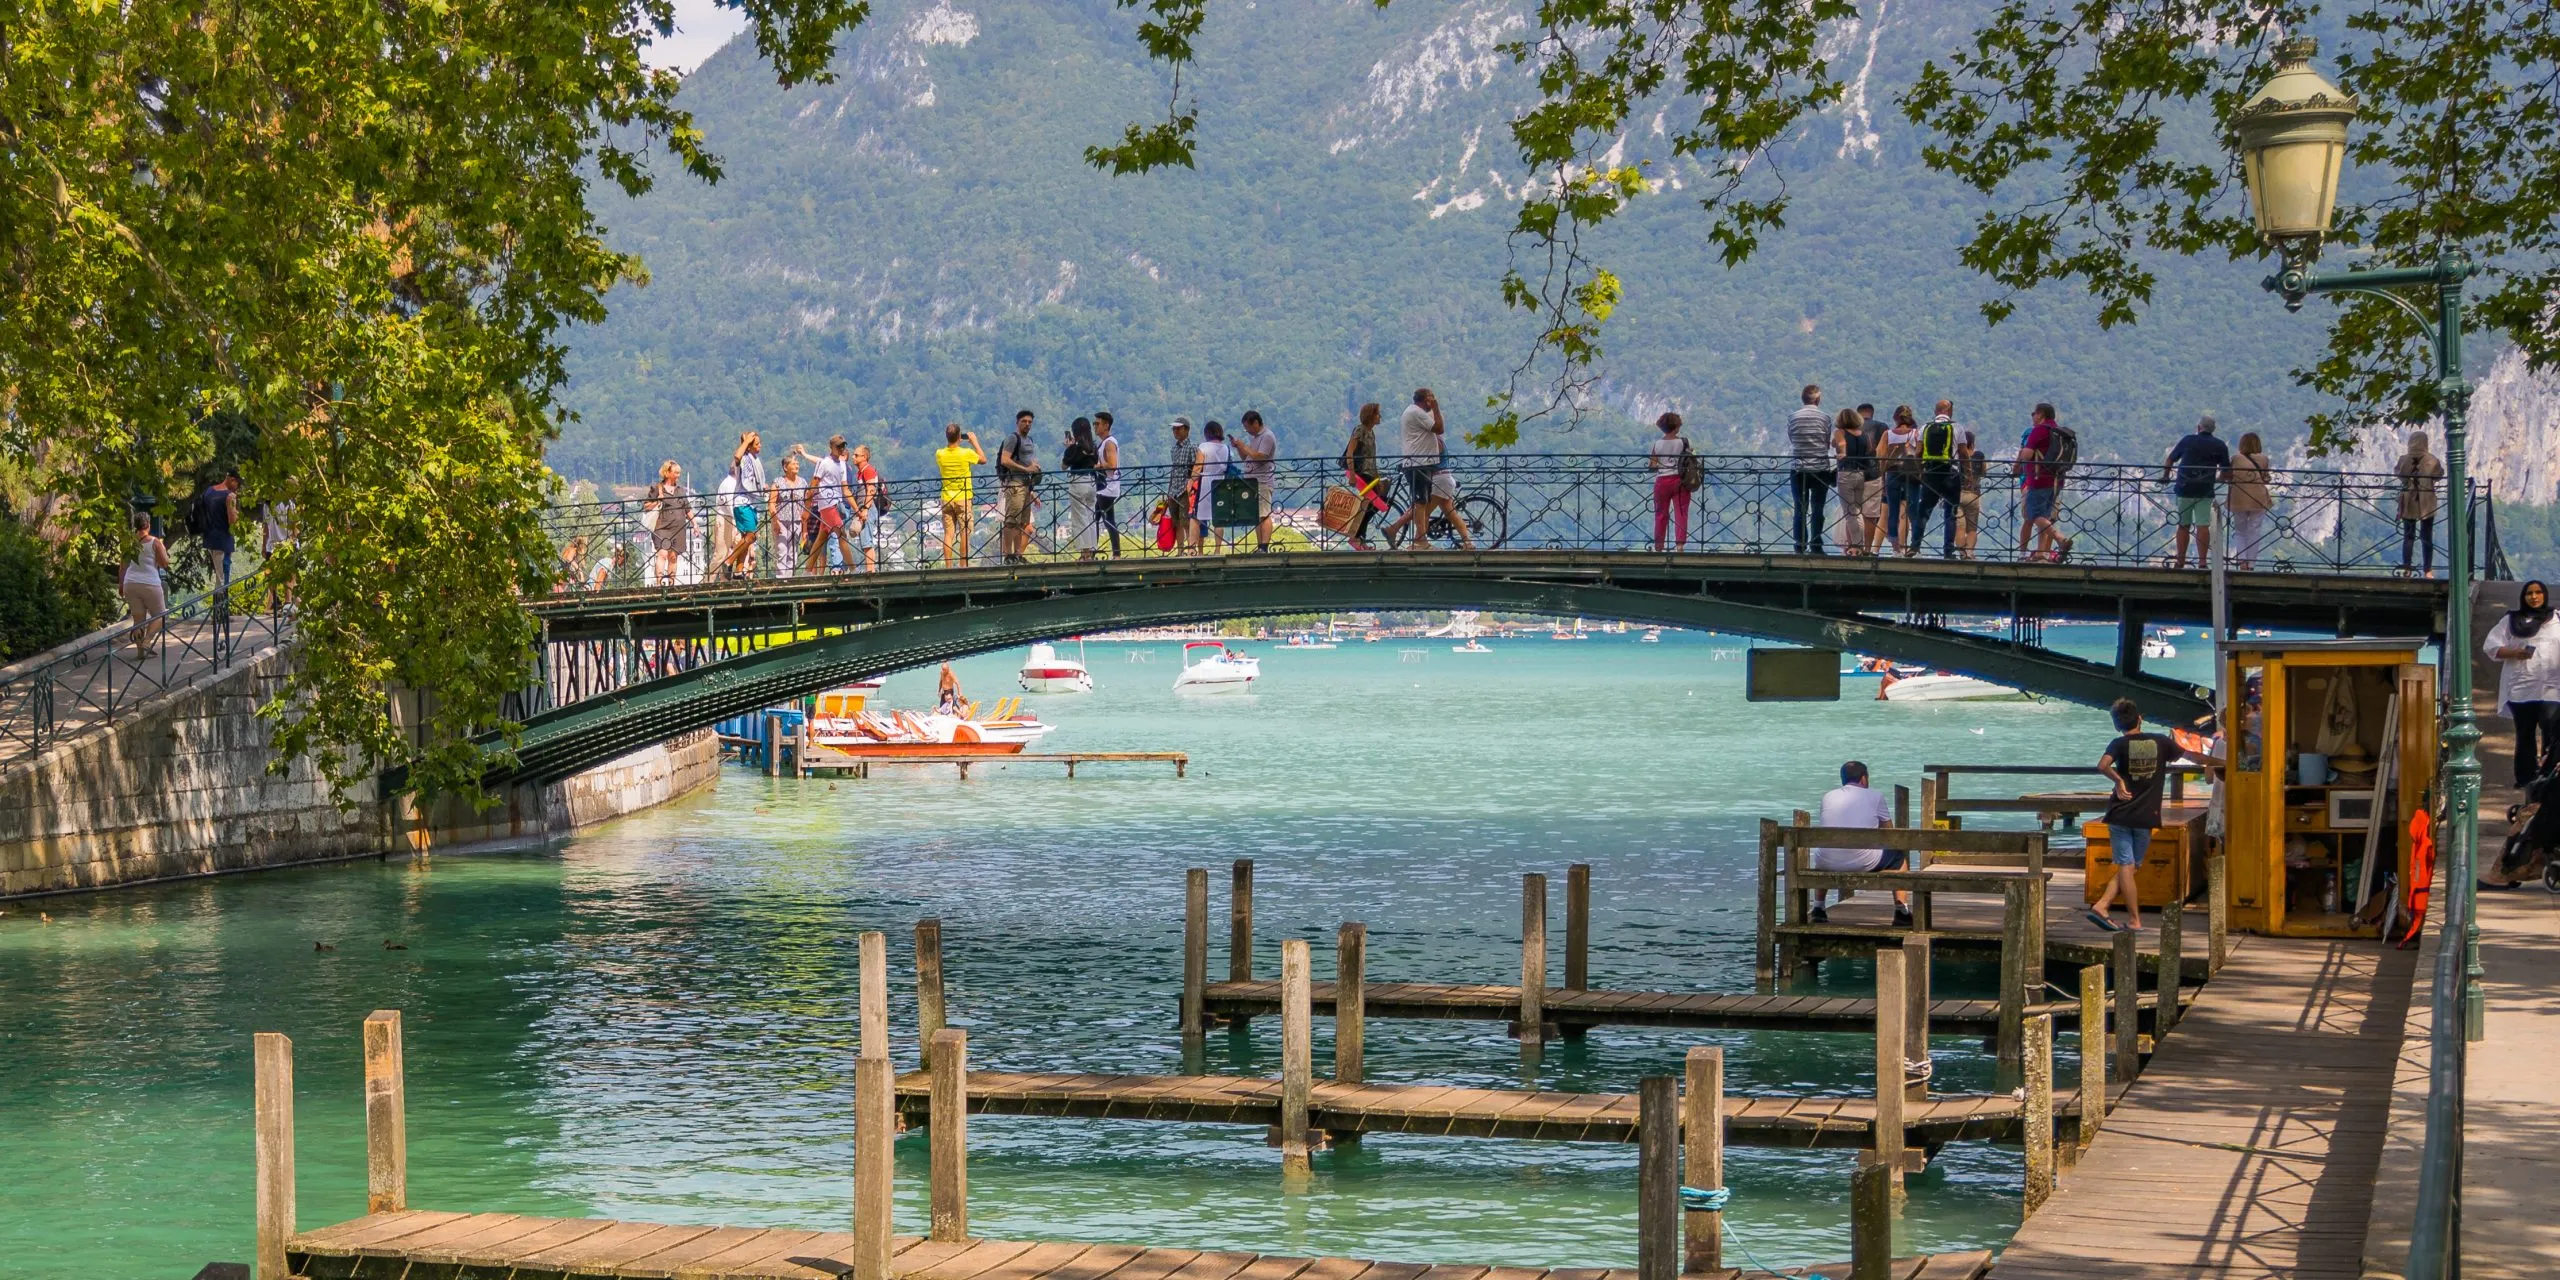 Pont des Amours bridge and tourists visiting in Annecy, France on a summer day